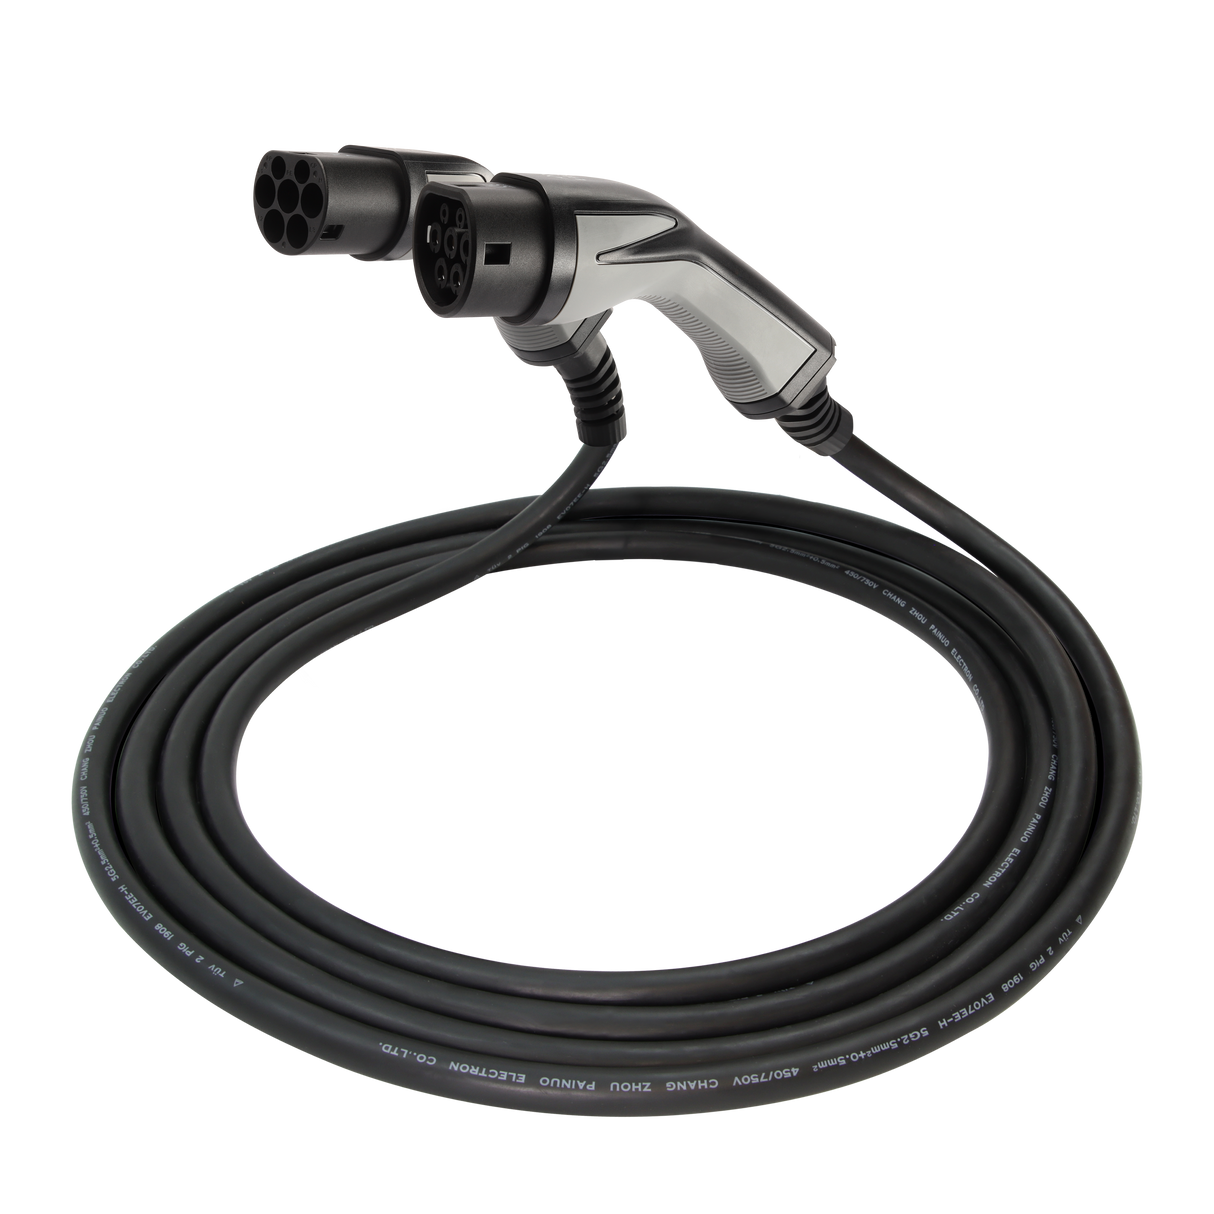 Charging cable Nissan Leaf - Erock Pro Type 2 - 16A 1 phase (3.7 kW)